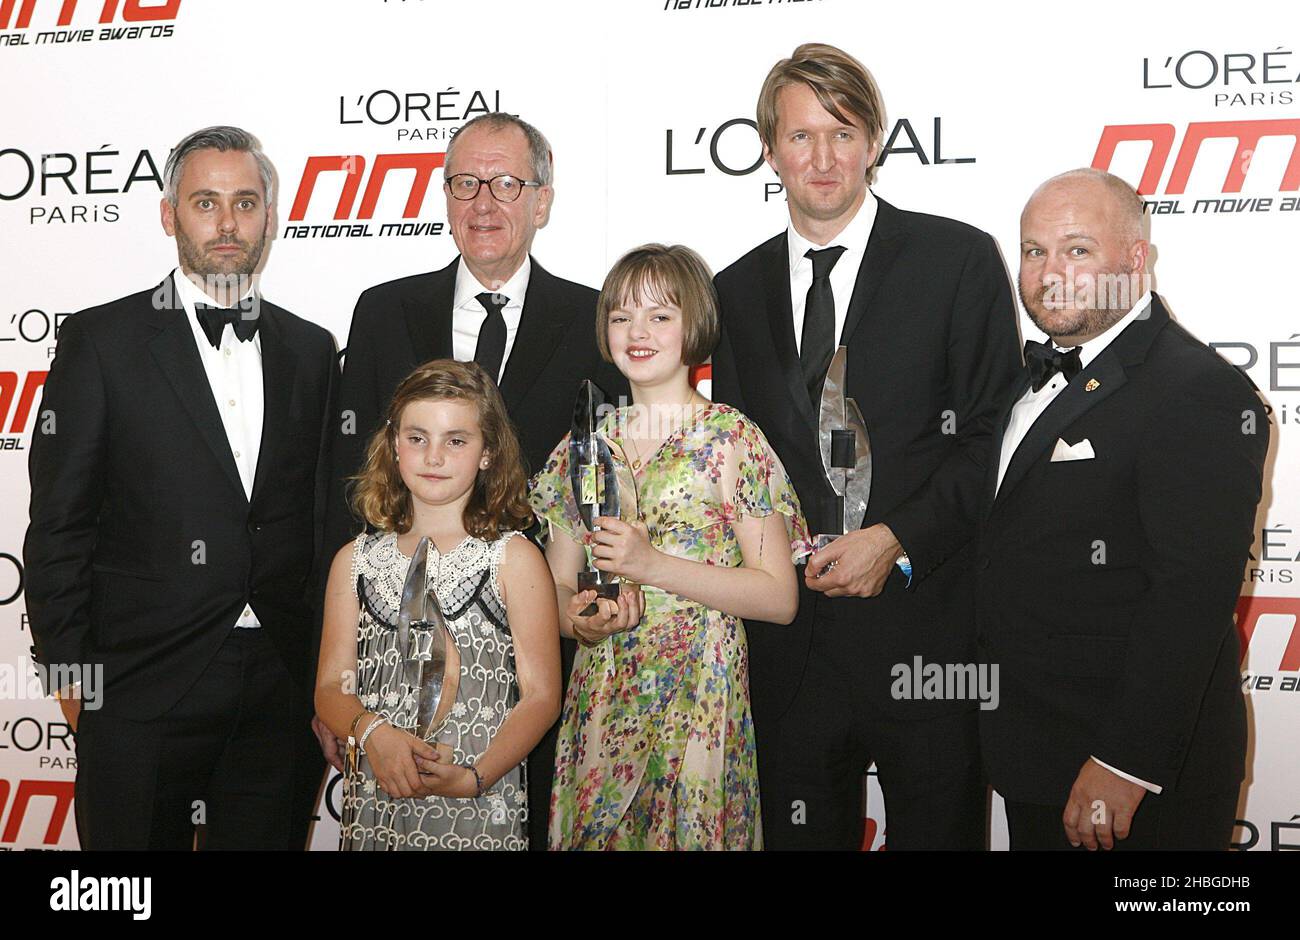 Cast and crew from The Kings Speech including Geoffery Rush, Tom Hooper, Freya Wilson and Ramona Marquez at the 2011 National Movie Awards at Wembley Arena, London Stock Photo